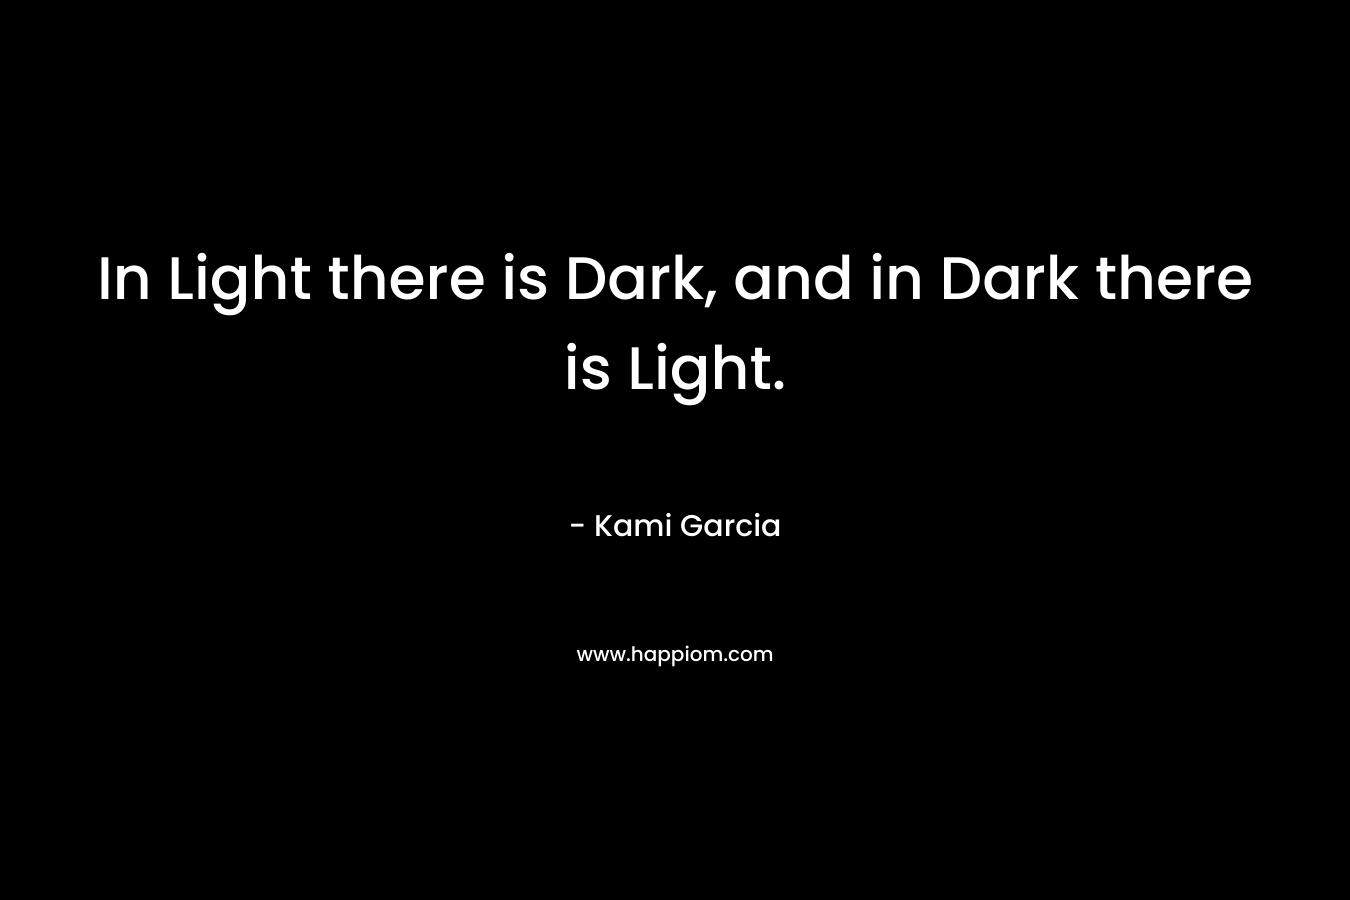 In Light there is Dark, and in Dark there is Light.